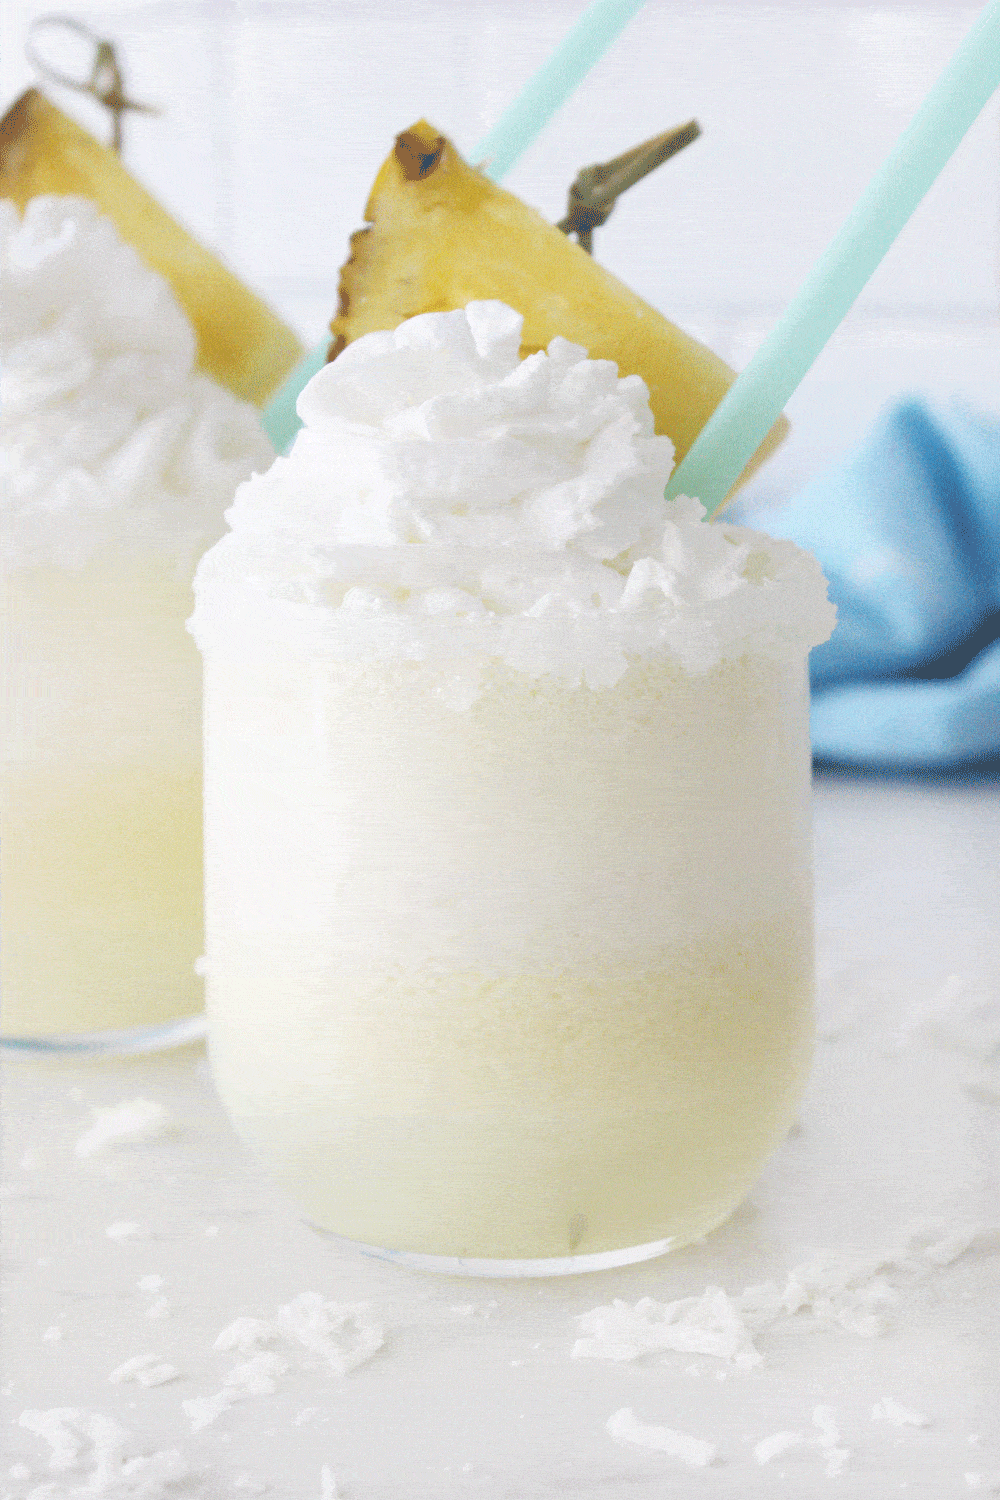 These skinny virgin pina colada slushes are amazing! A totally guilt free and refreshing summer drink!